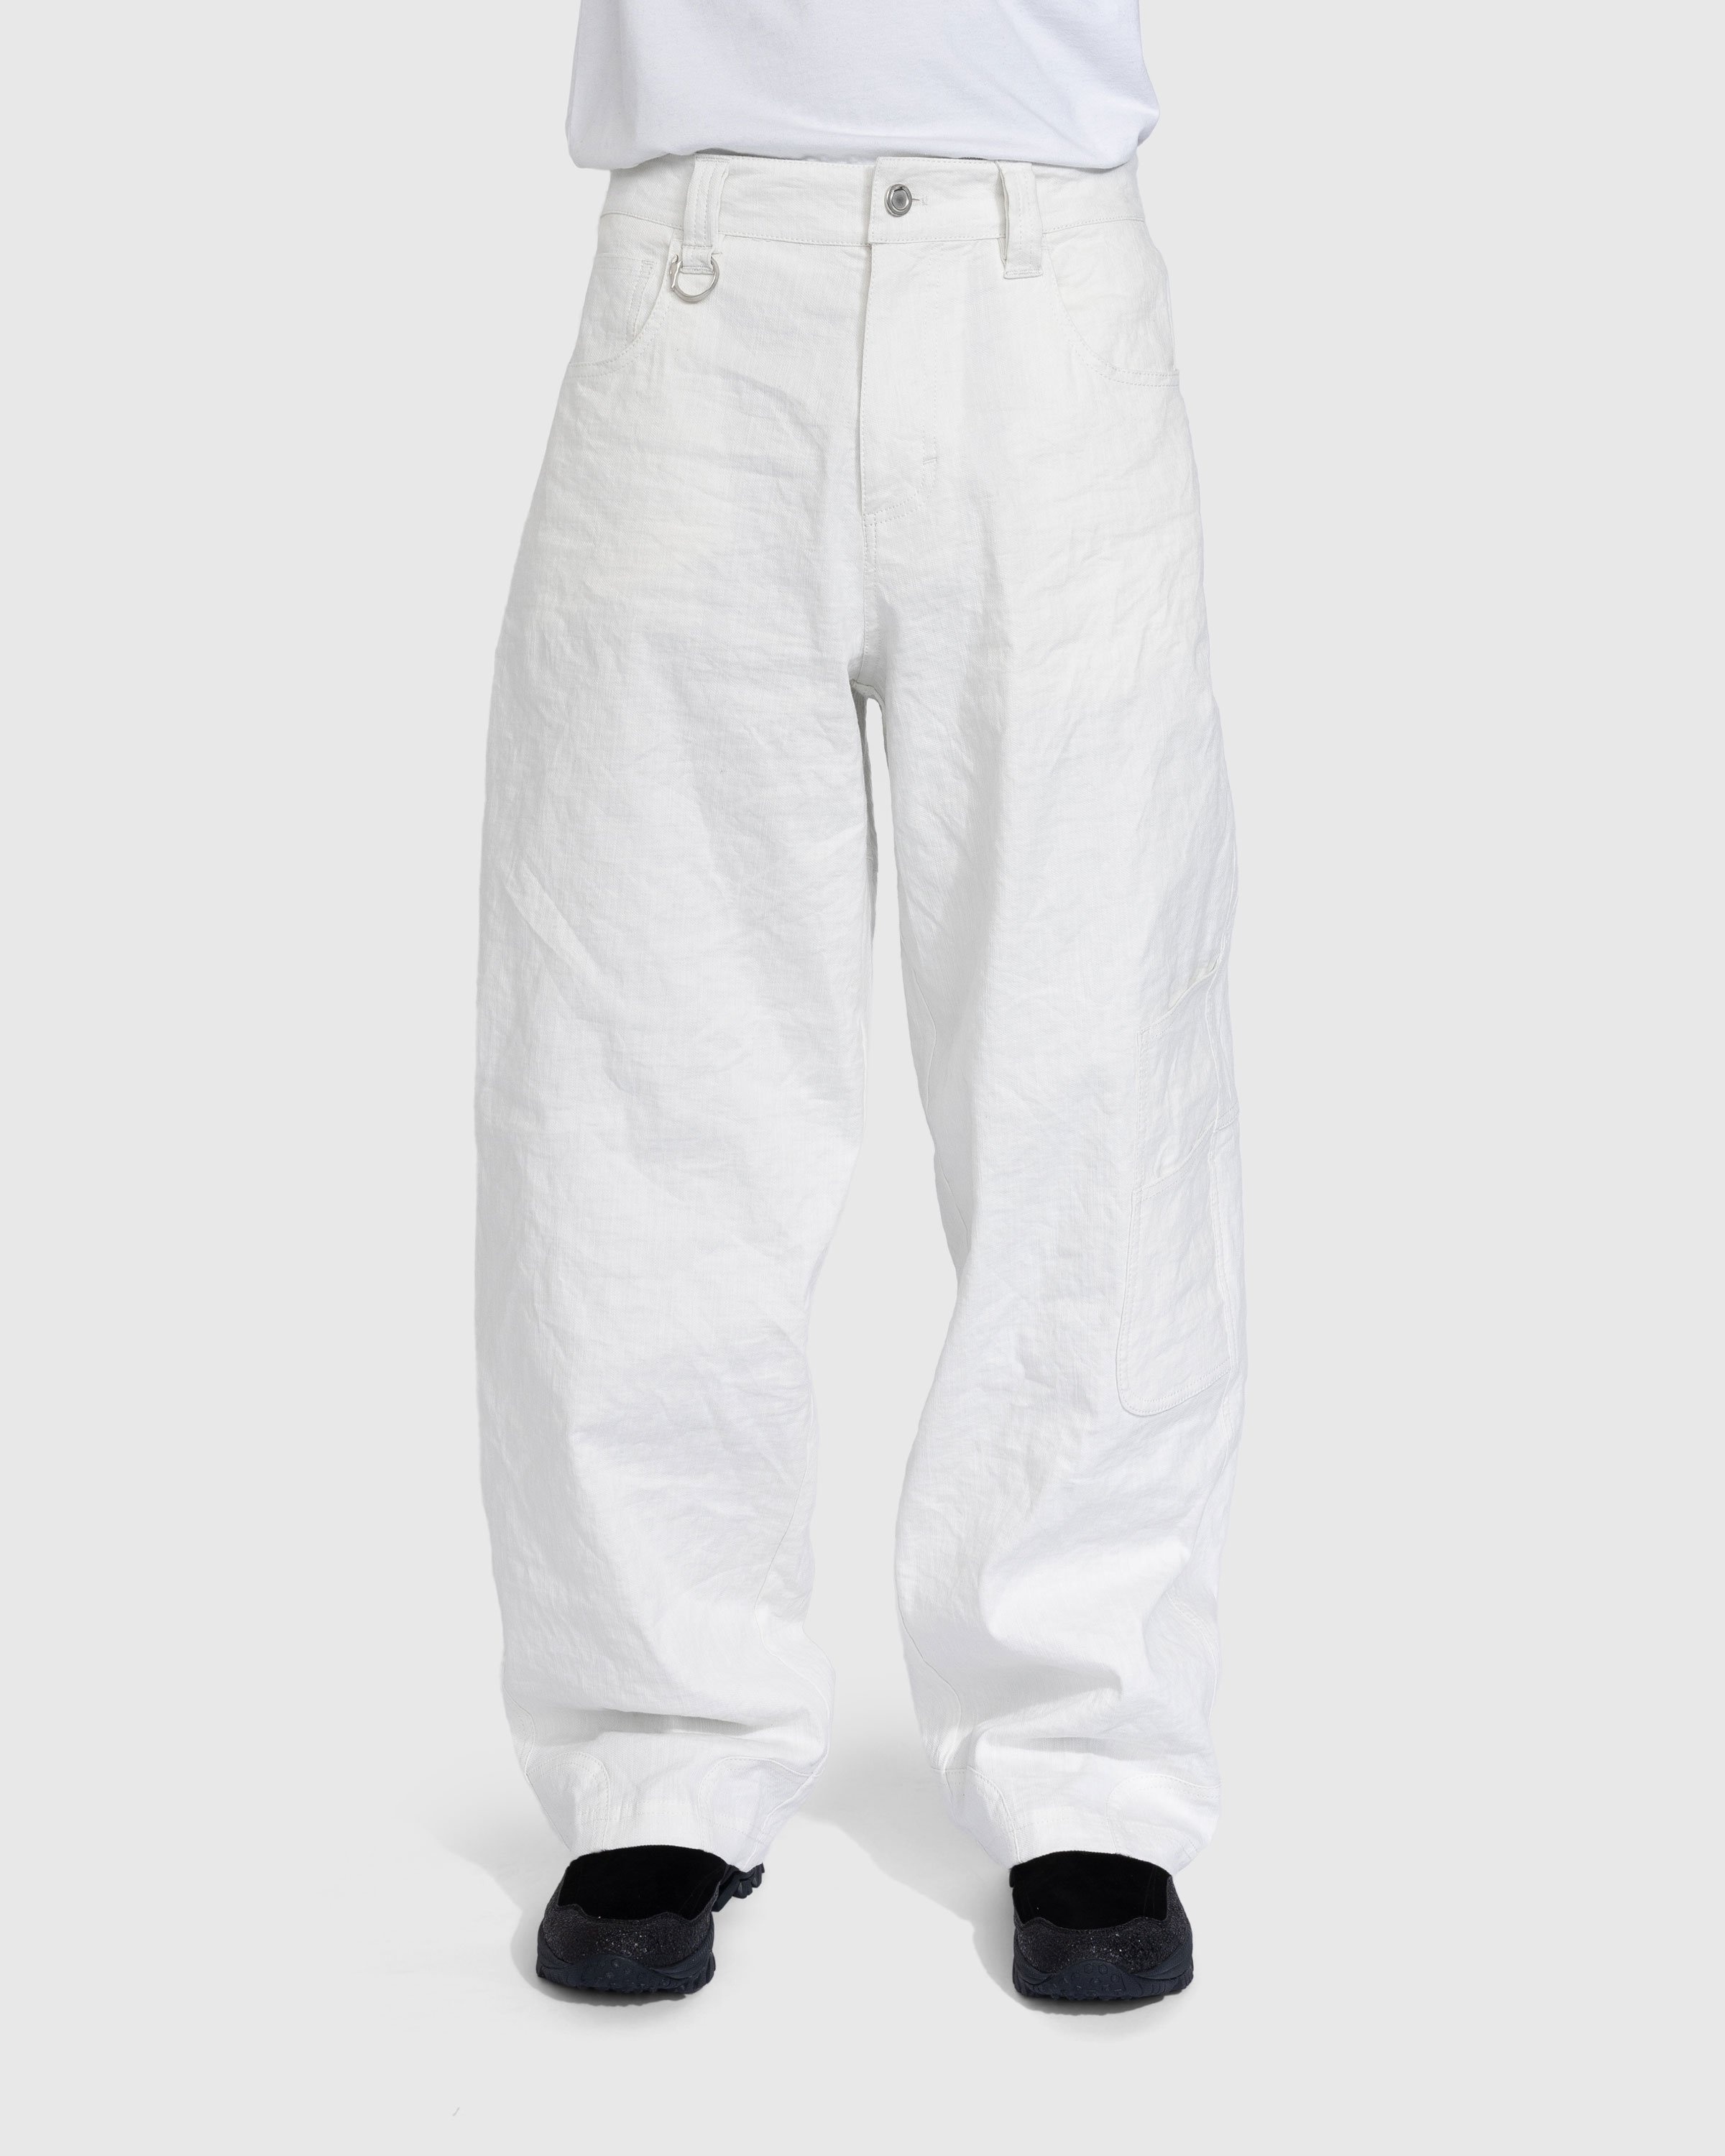 Trussardi – Wrinkled Cotton Trousers White - Pants - White - Image 2